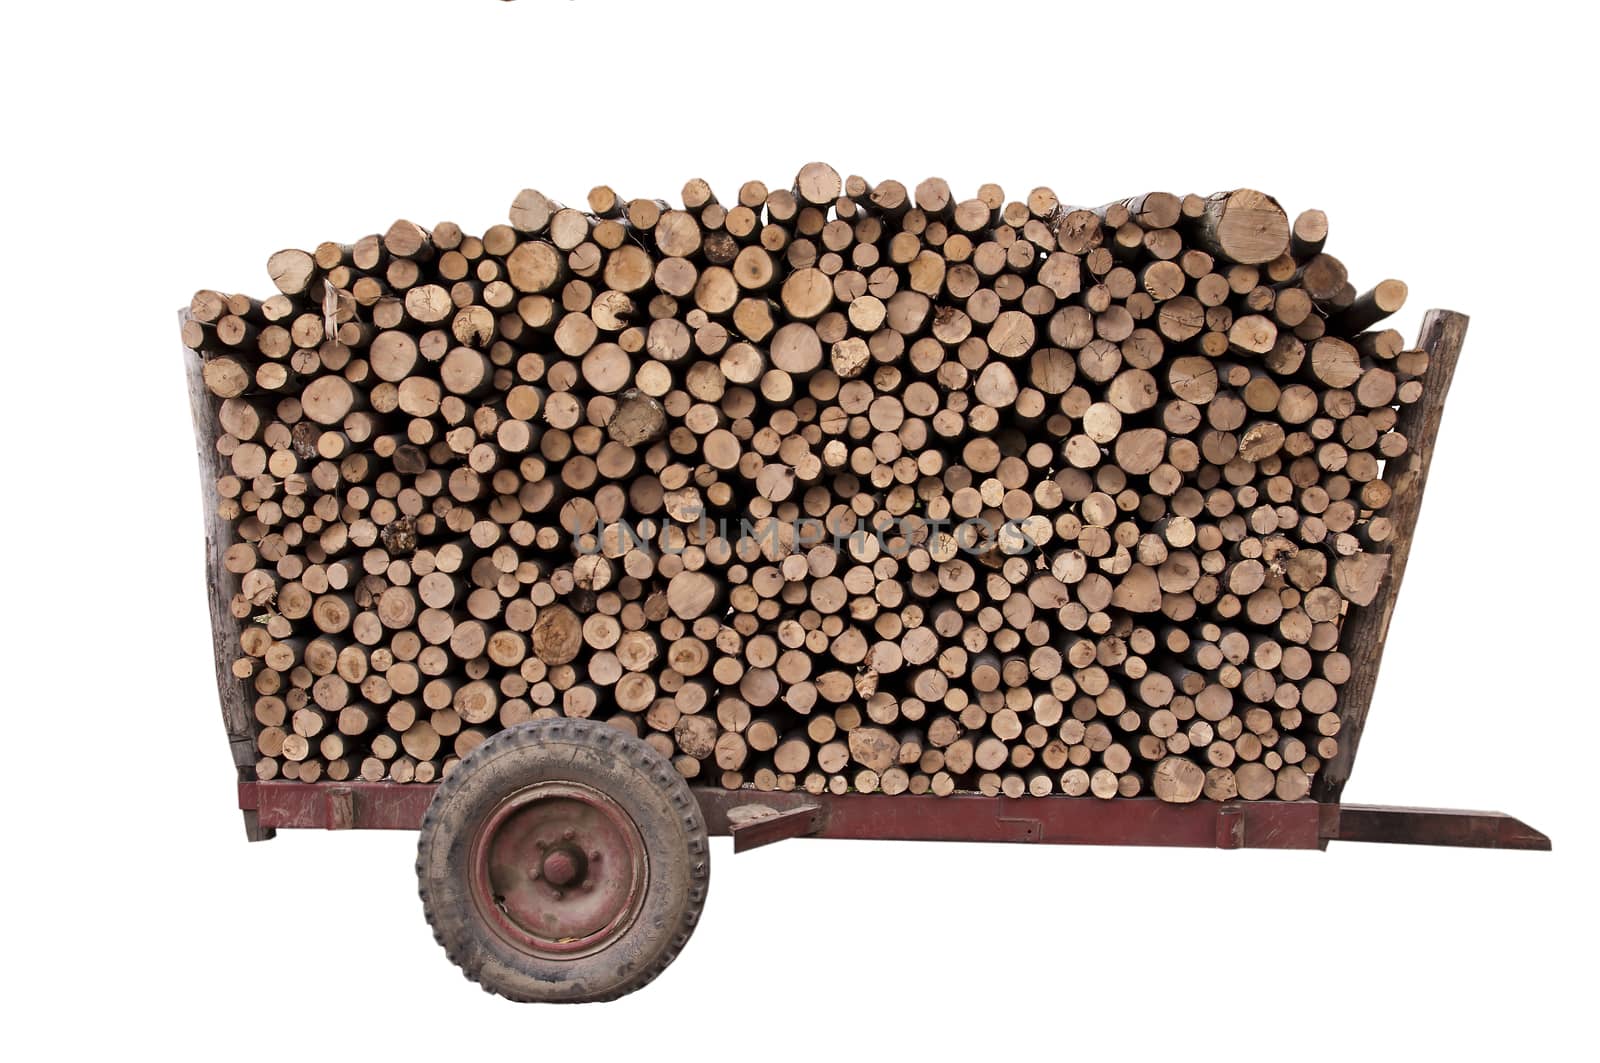 firewood on a trailer by pozezan